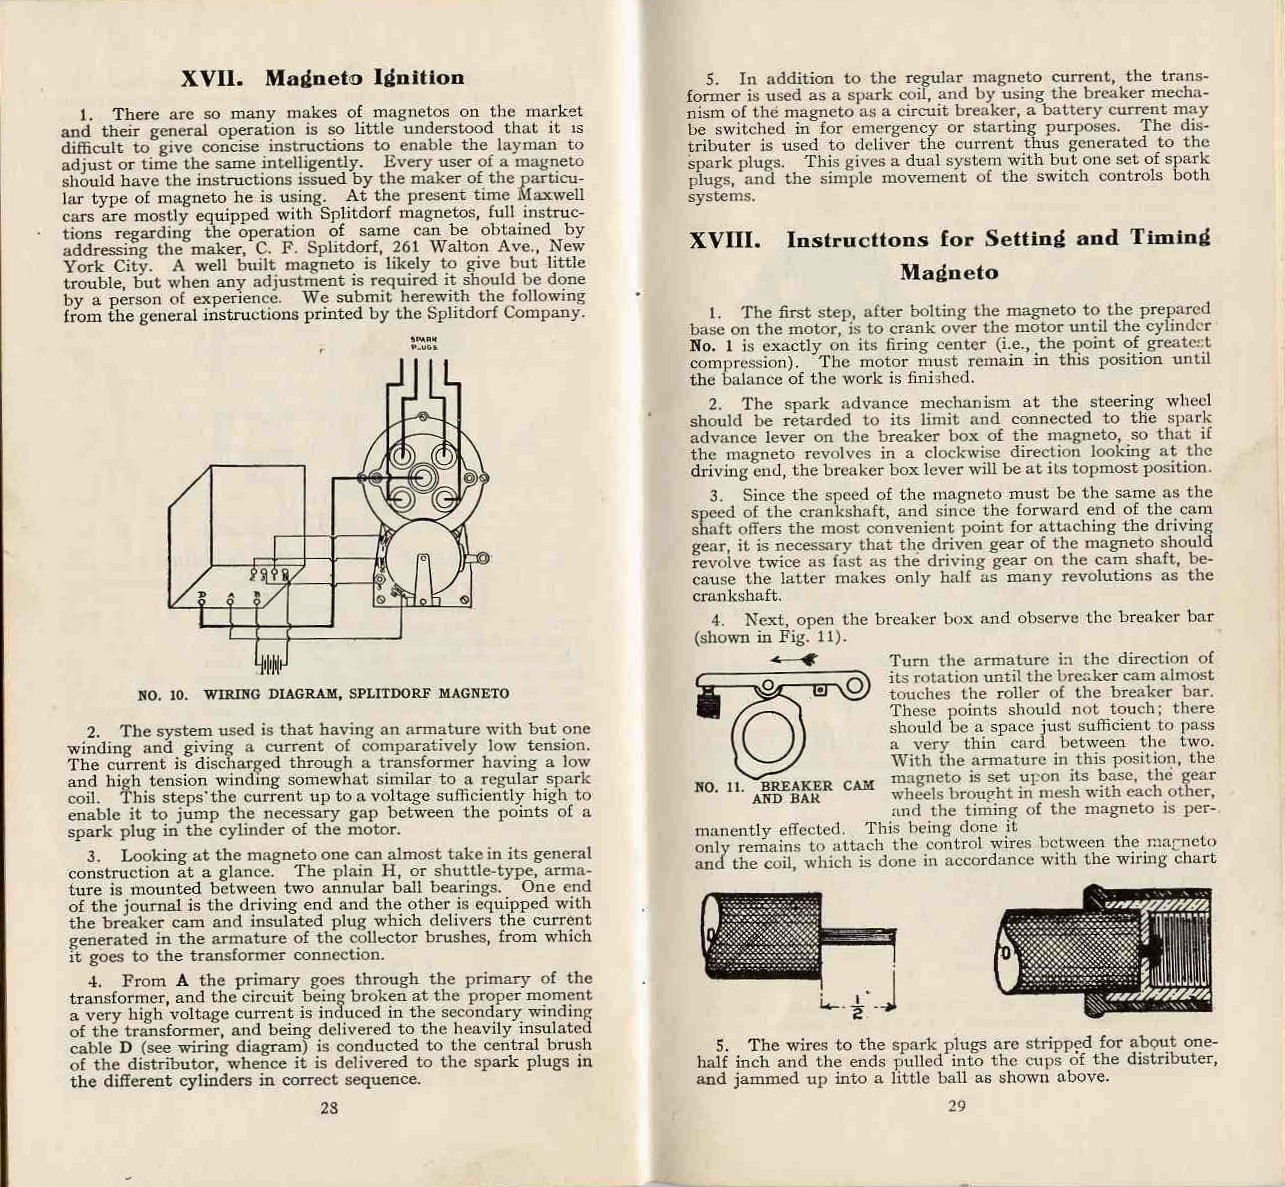 1909 Maxwell Instructions-28-29